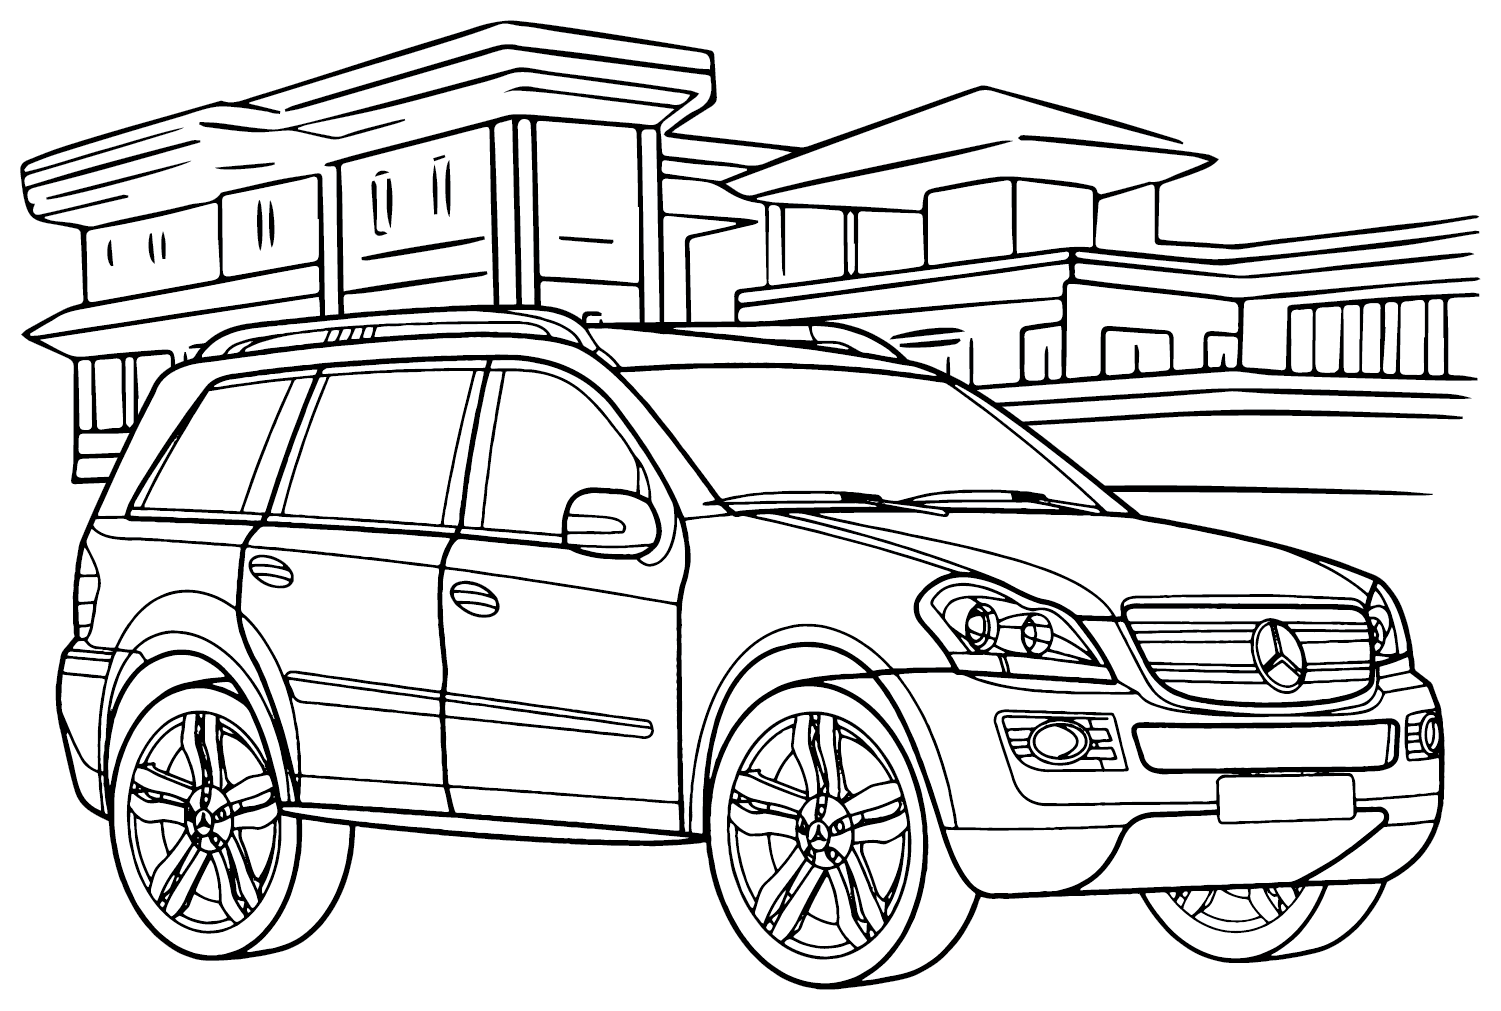 Mercedes-Benz Coloring Page Free from Mercedes-Benz